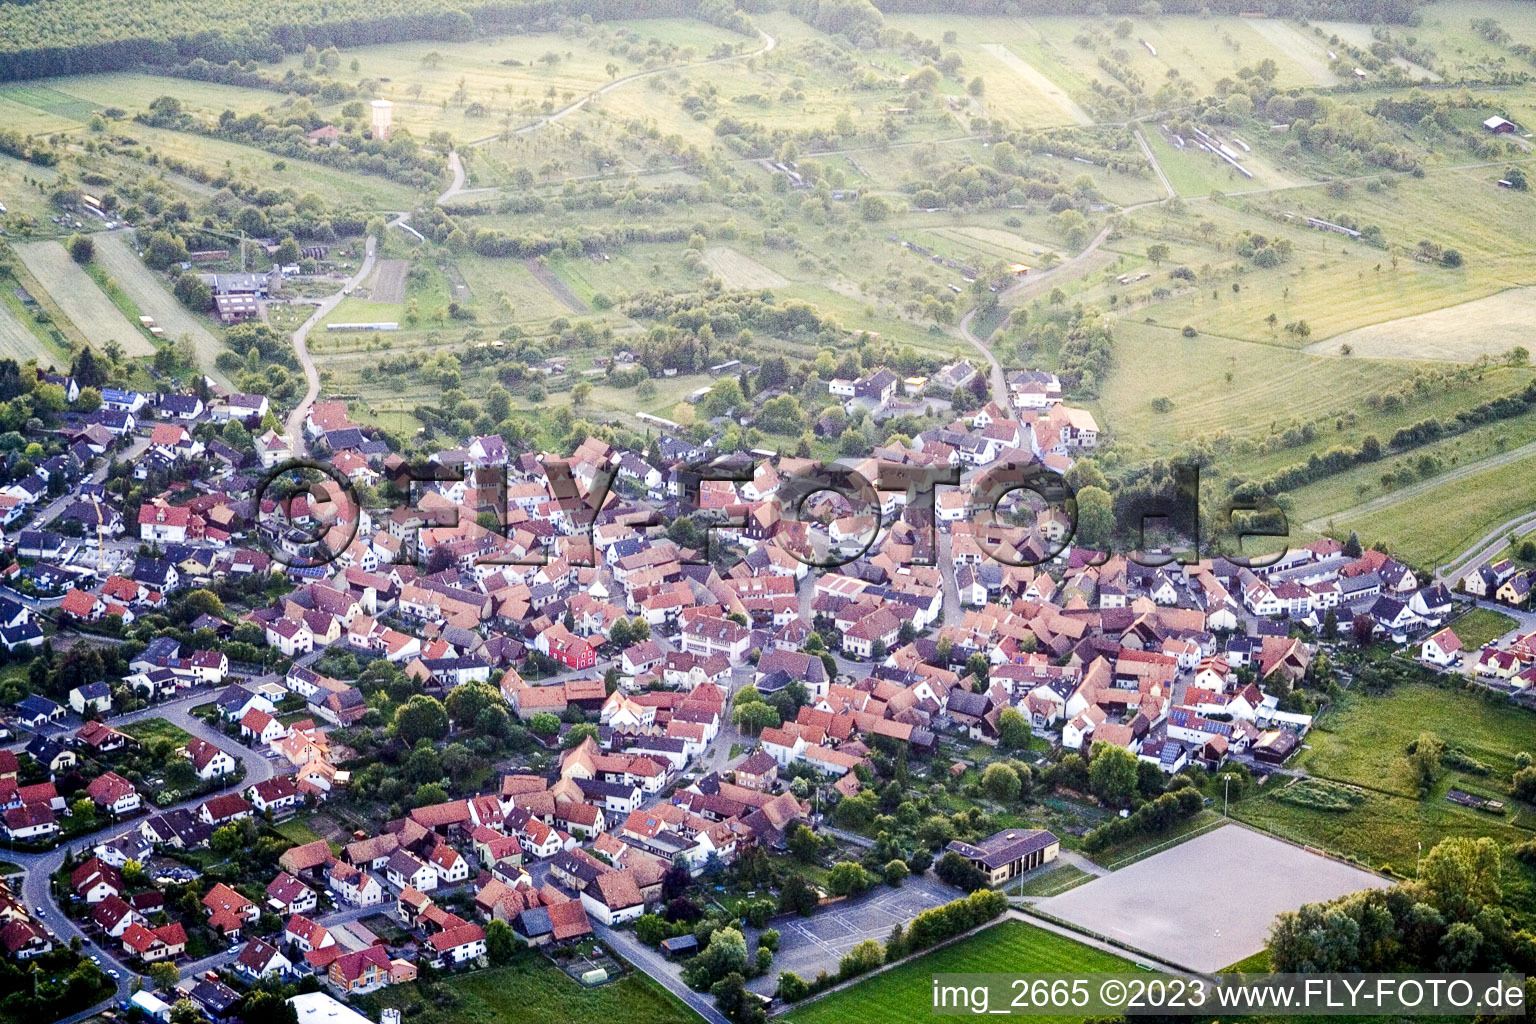 Aerial view of From the southeast in the district Büchelberg in Wörth am Rhein in the state Rhineland-Palatinate, Germany